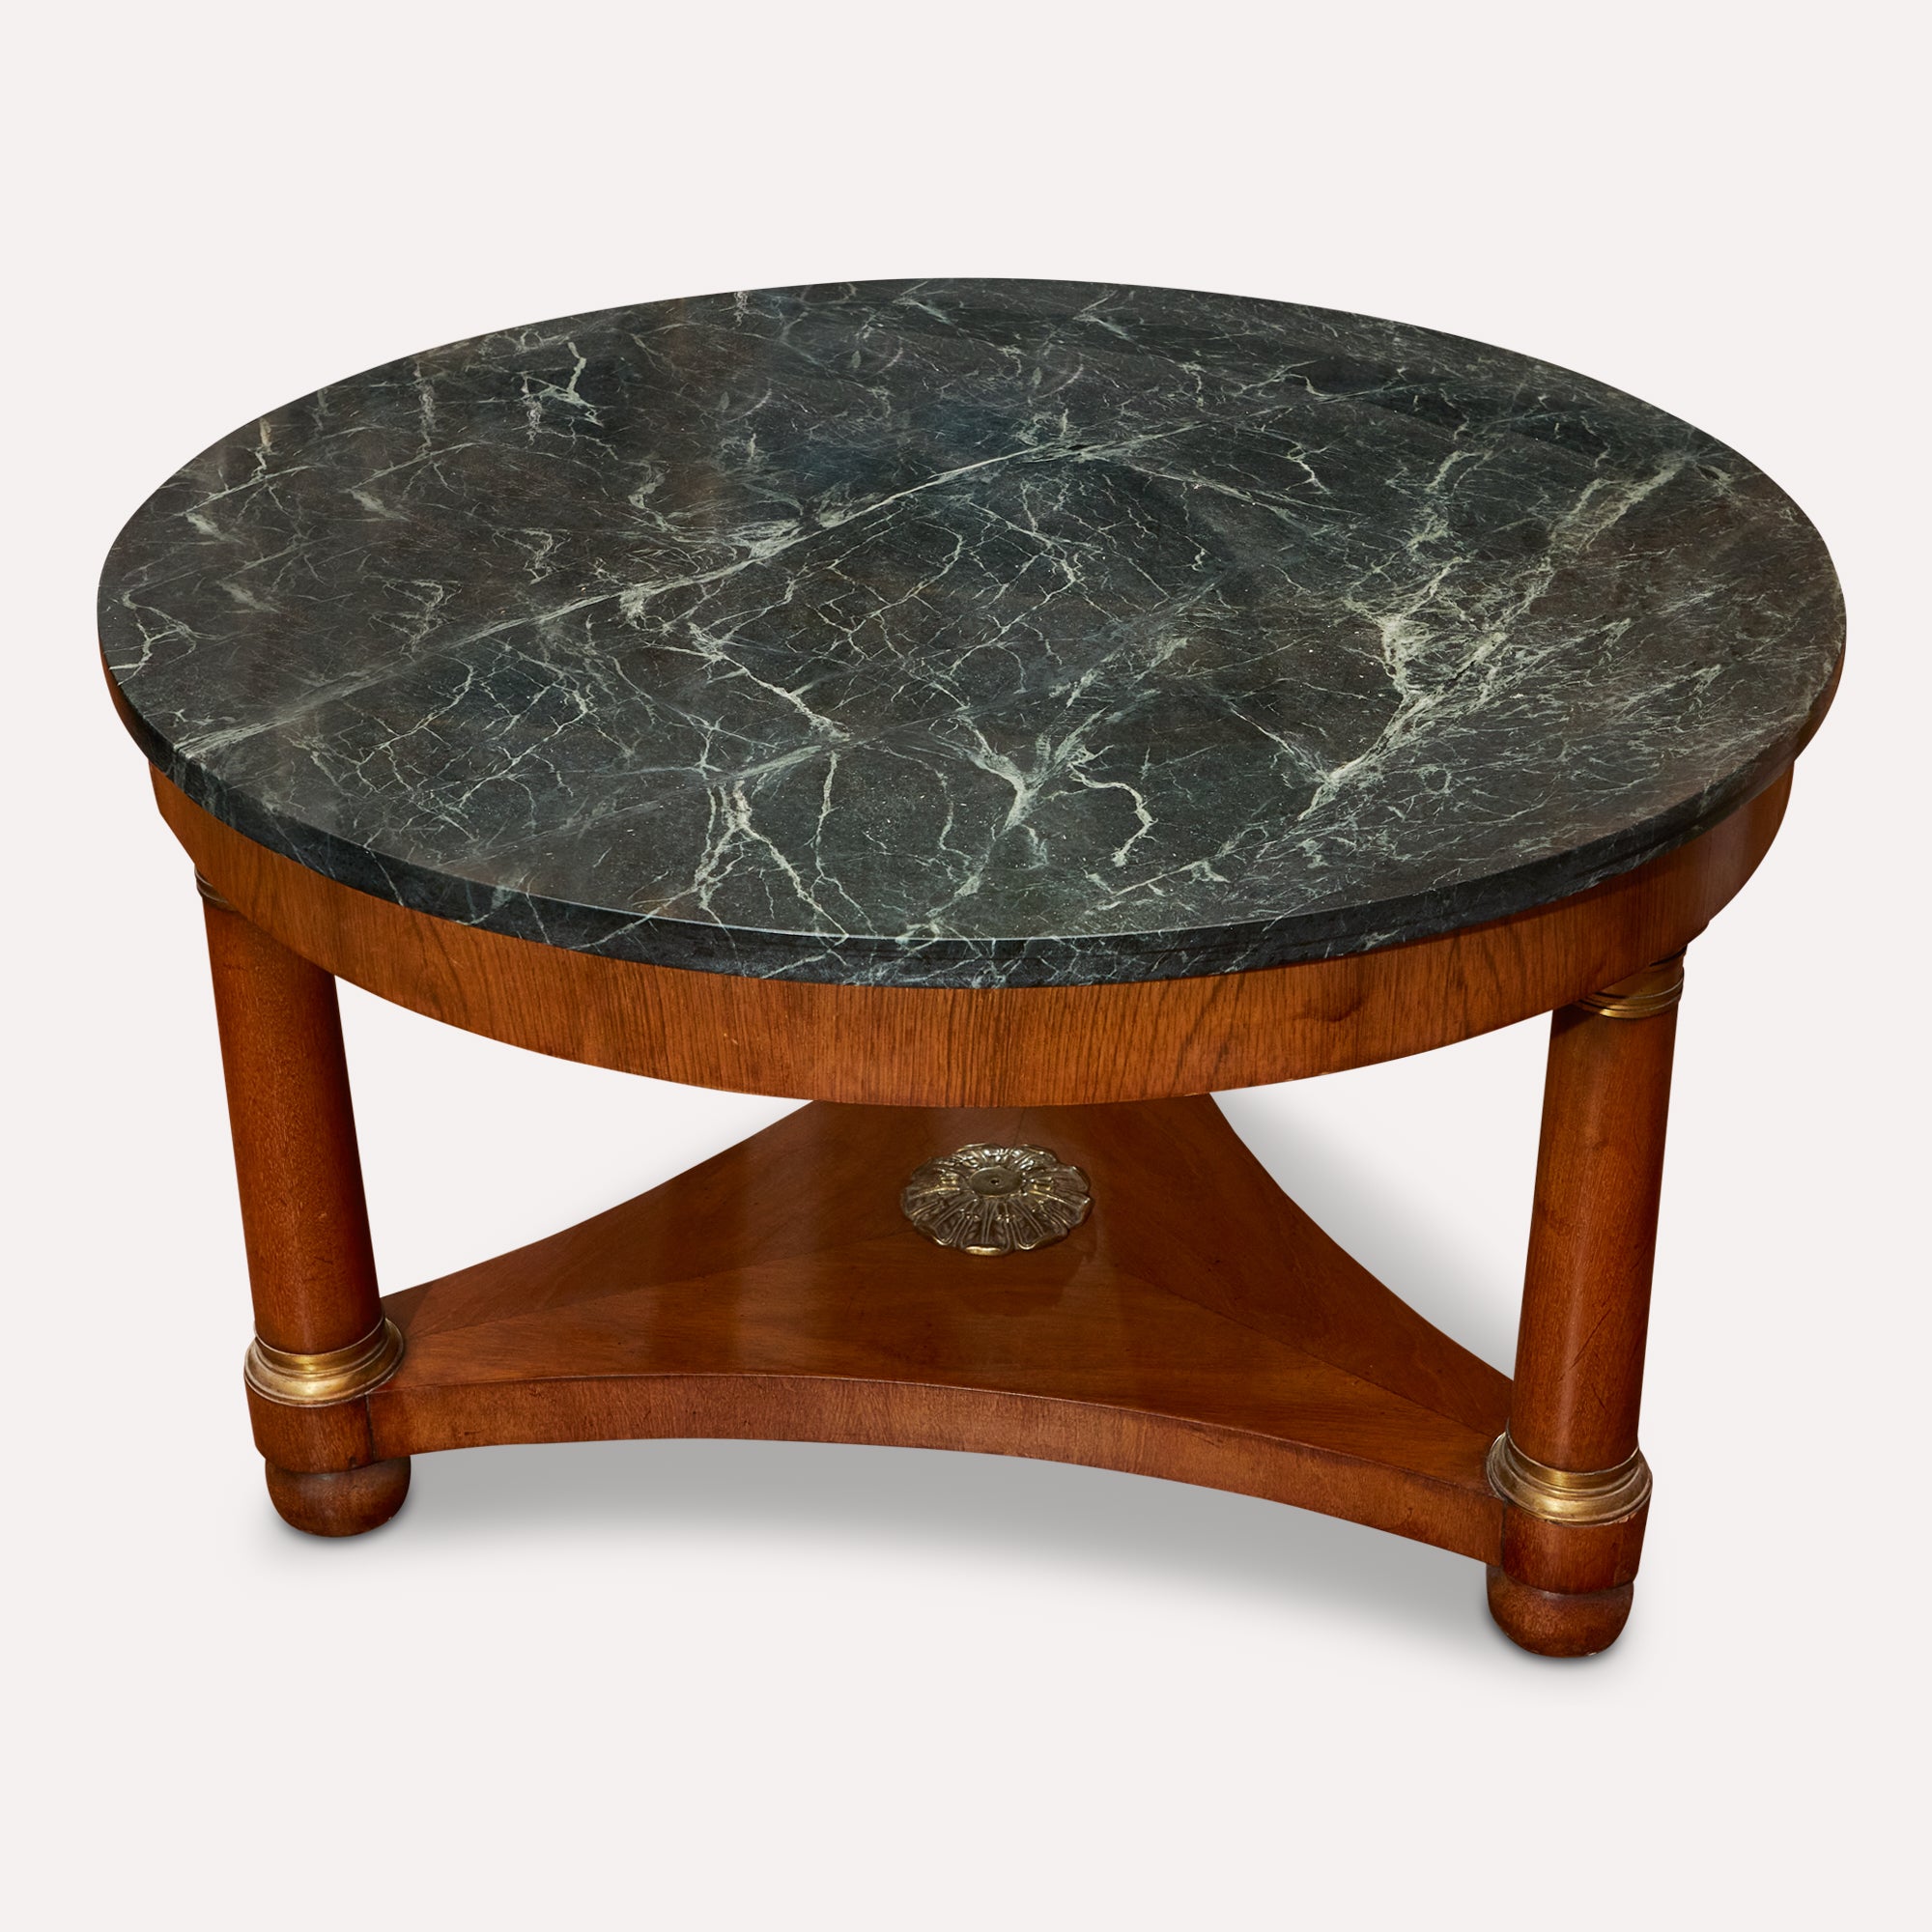 empire Mahogany and Marble side table with brass fittings. tripod style 